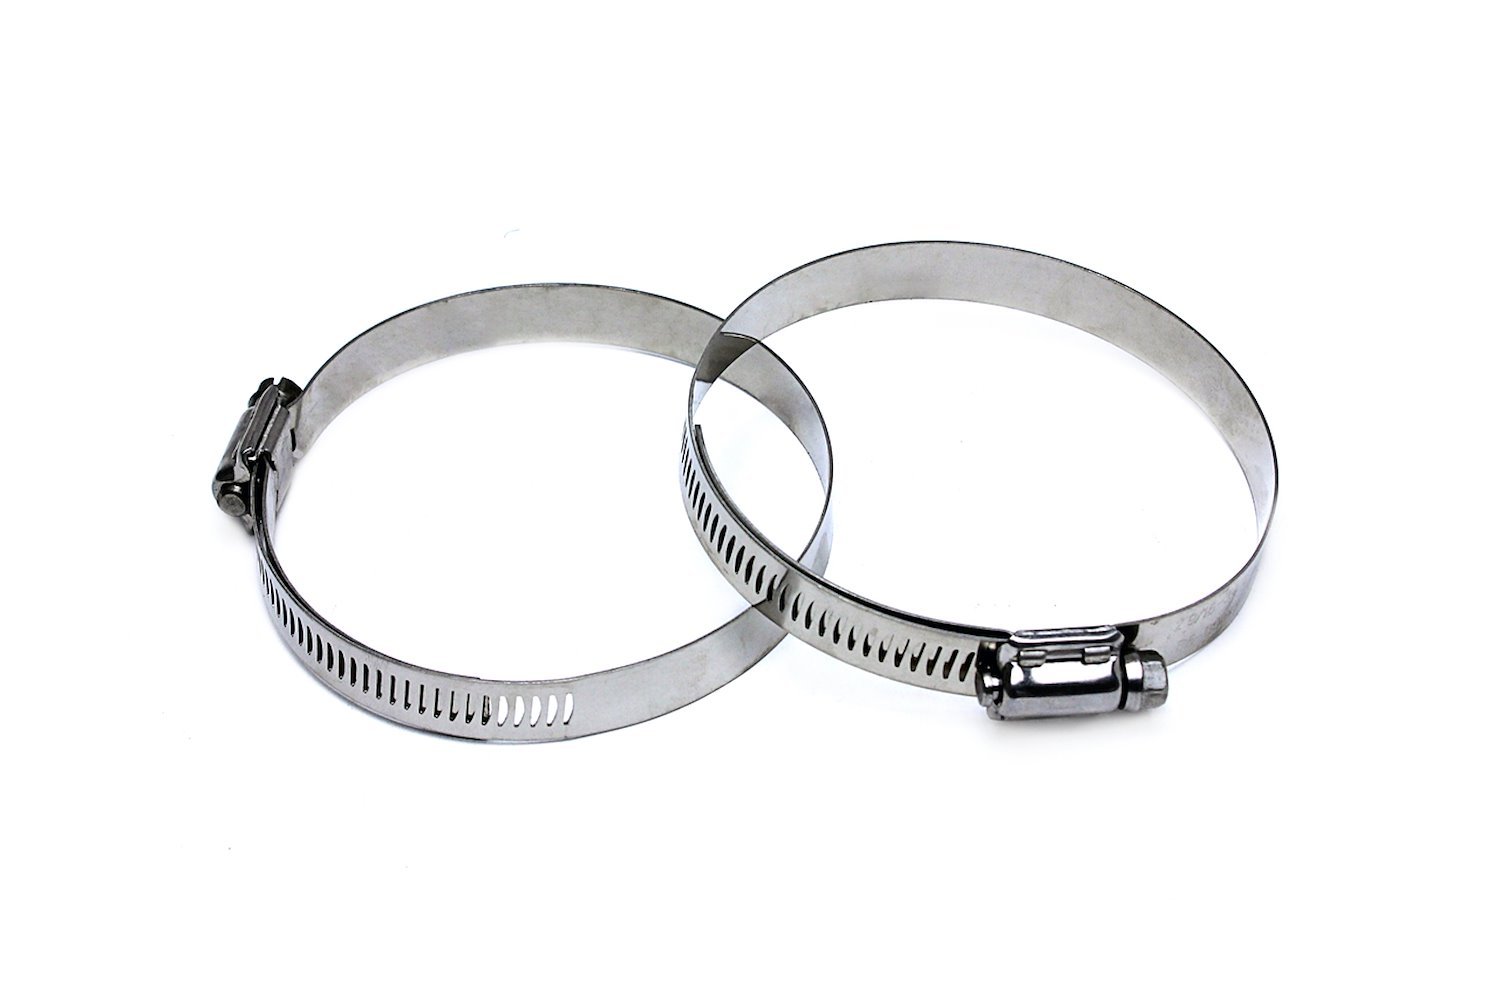 SSWC-105-127x2 Stainless Steel Worm Gear Hose Clamp, Effective Range: 4-1/8 in.- 5 in., 2Pc